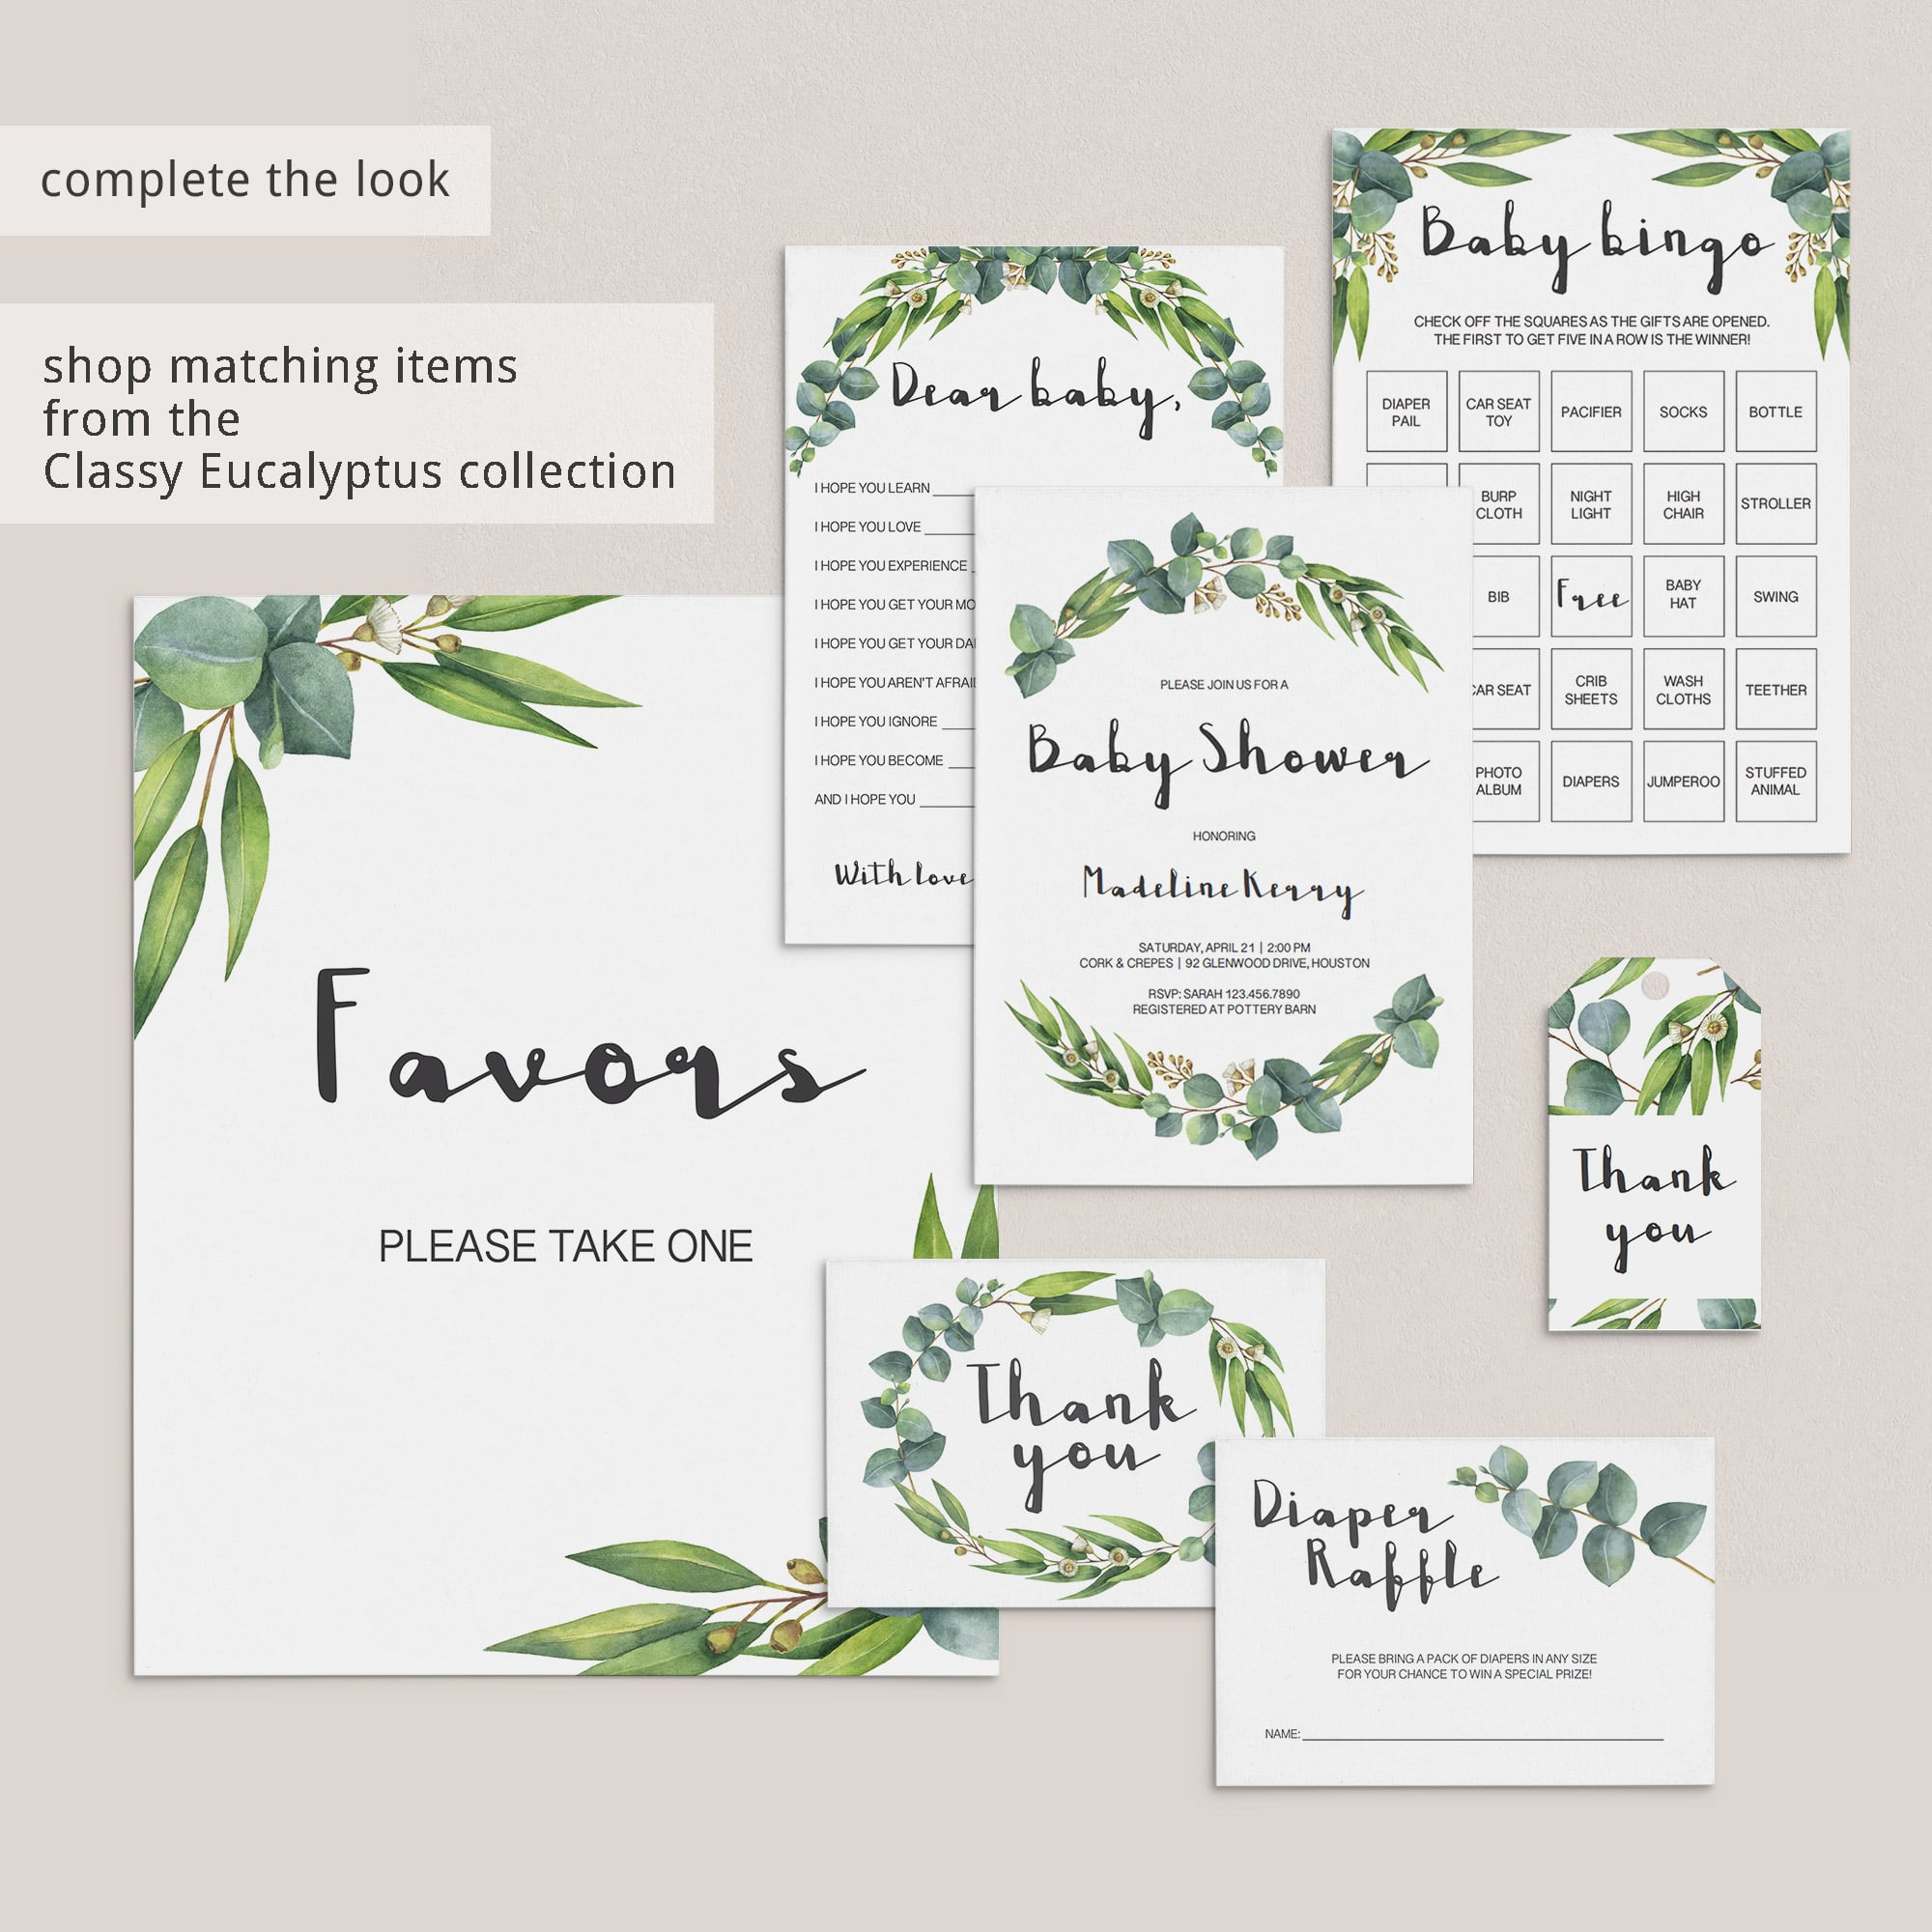 Gender neutral baby shower ideas with green leaves by LittleSizzle